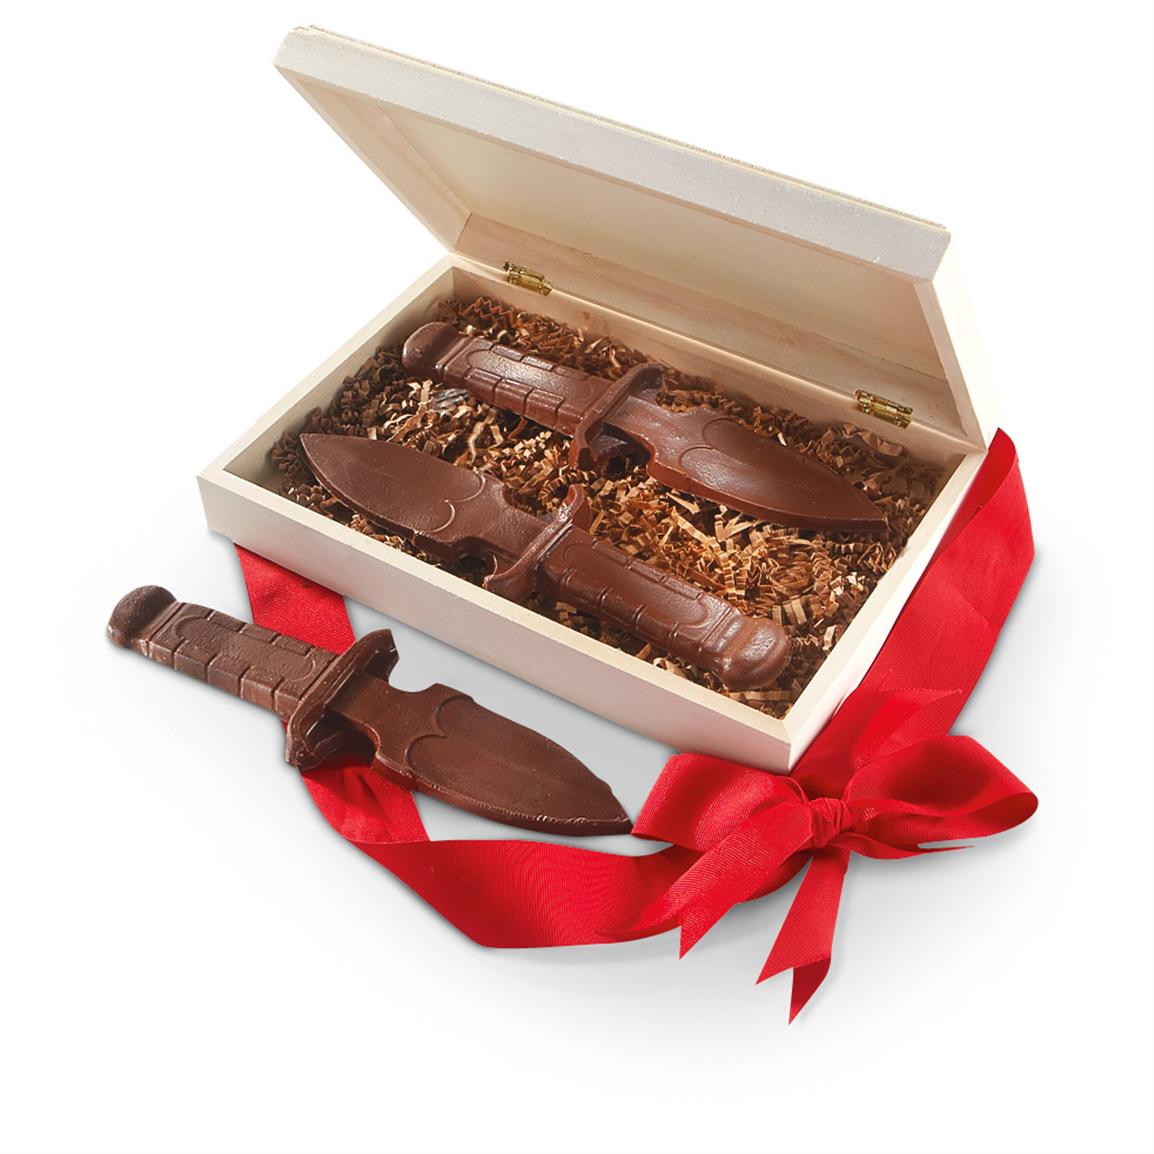 3 Chocolate Knives in Gift Box - 209453, Food Gifts at ...